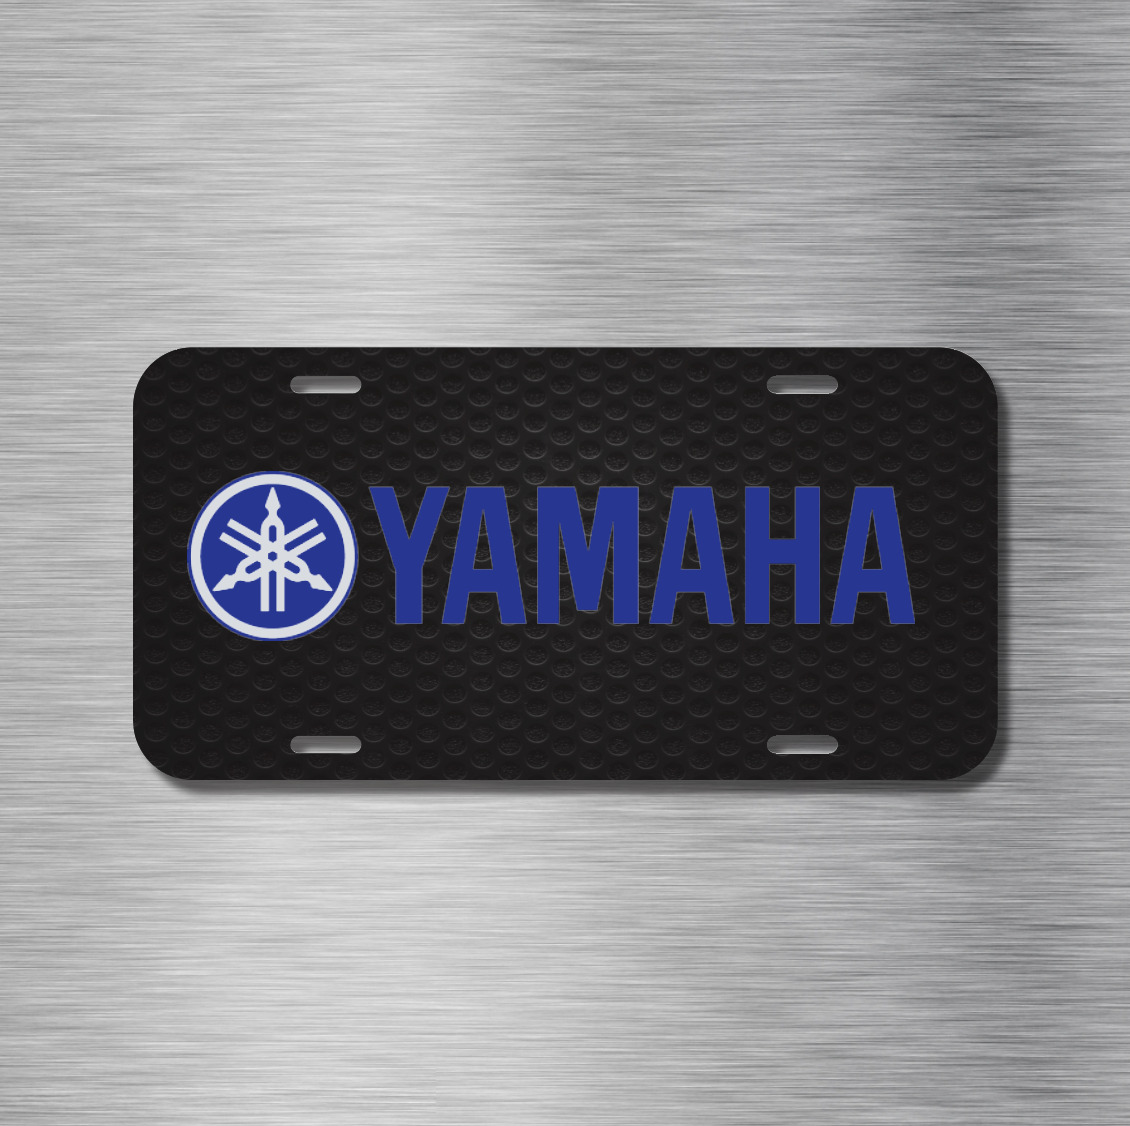 Yamaha Motorcycle boat Atv snowmobile Vehicle License Plate Front Auto Tag NEW 